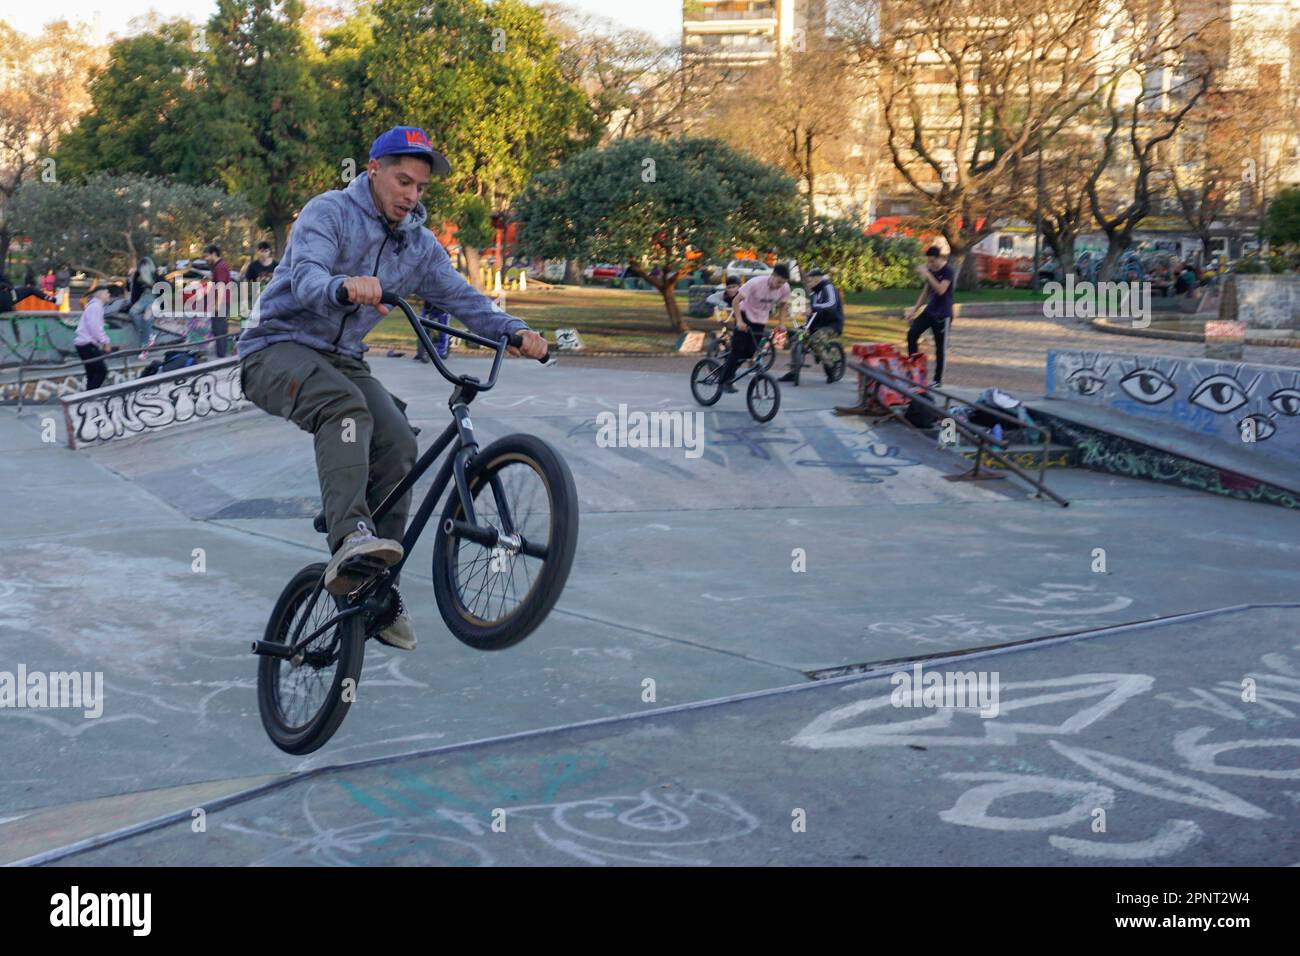 Fernando Nuñez pivots in the air on his BMX bike at Parque Centenario, Buenos Aires, Argentina. Nuñez, who has been practicing and performing BMX tricks for 10 years, says riders meet in the park to share tips and teach each other new skills. (Lucila Pellettieri/Global Press Journal) Stock Photo